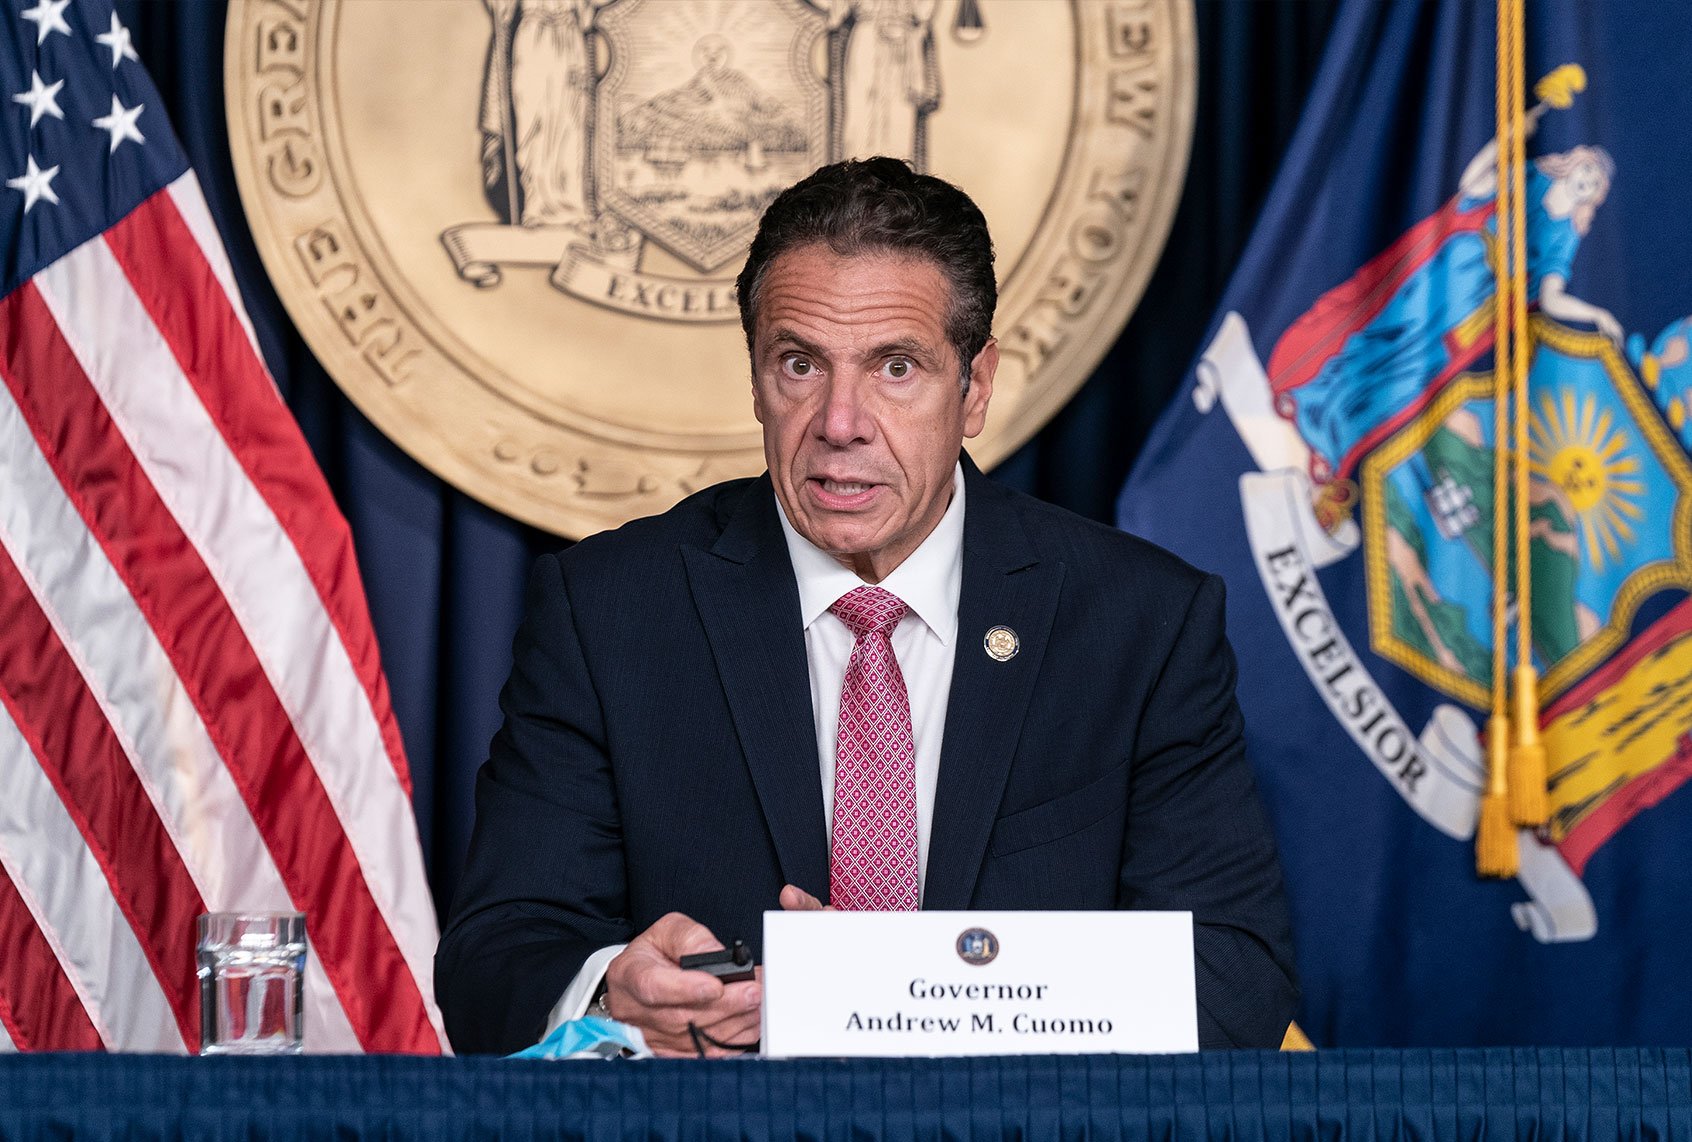 2nd former staffer accuses Andrew Cuomo of sexual harassment – NYT file